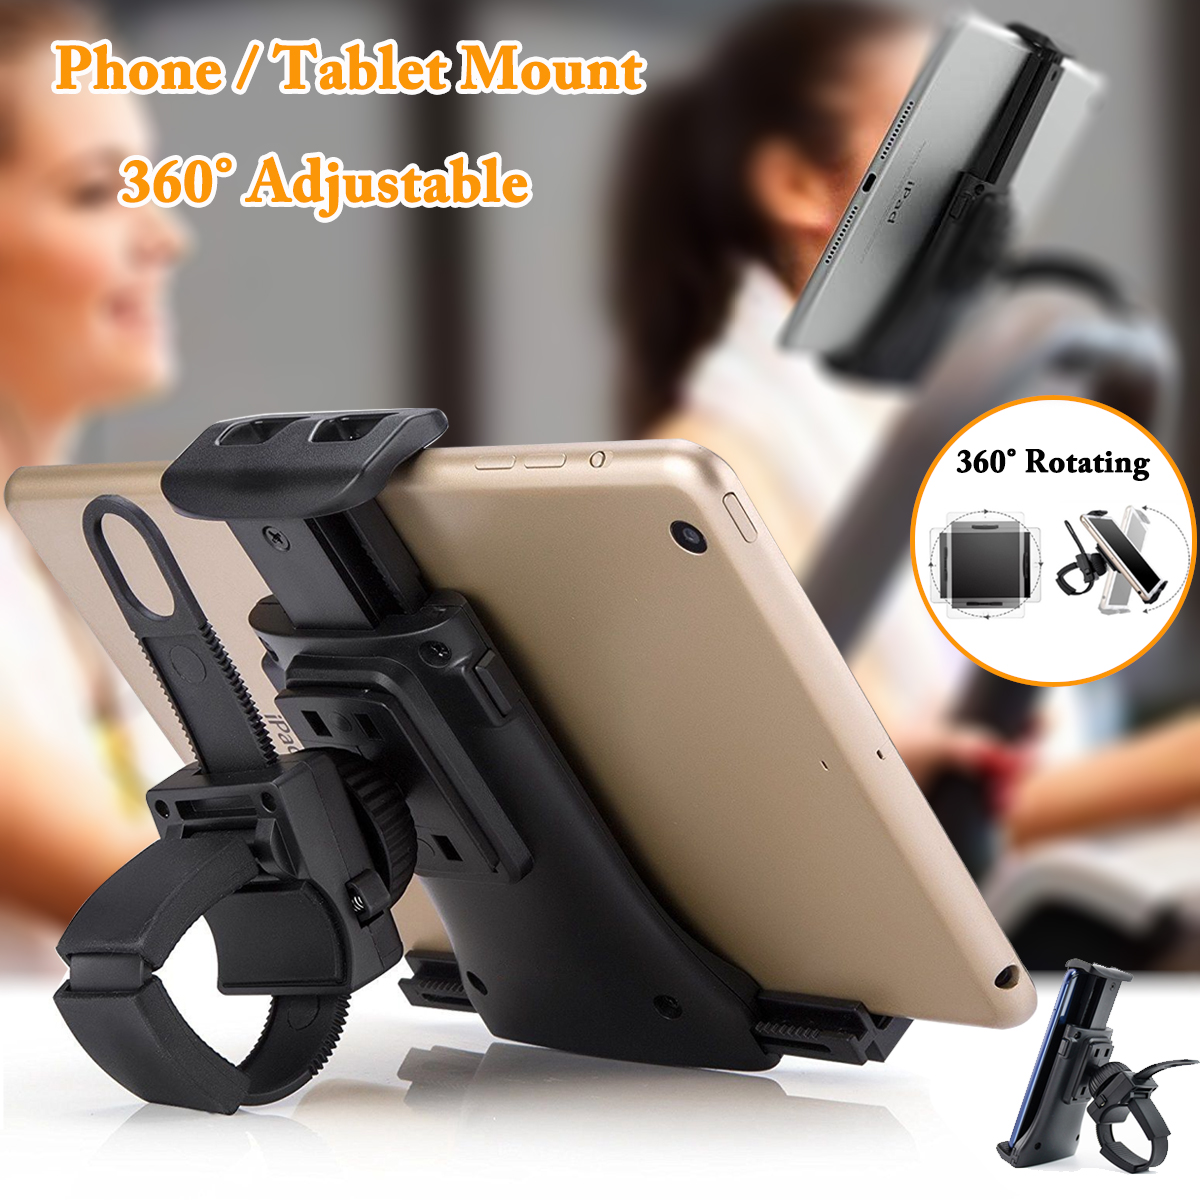 Bakeey-Universal-Mobile-Phone-Tablet-Holder-Fitness-Room-Exercise-Outdoor-MTB-Motorcycle-Road-Bike-B-1884008-1